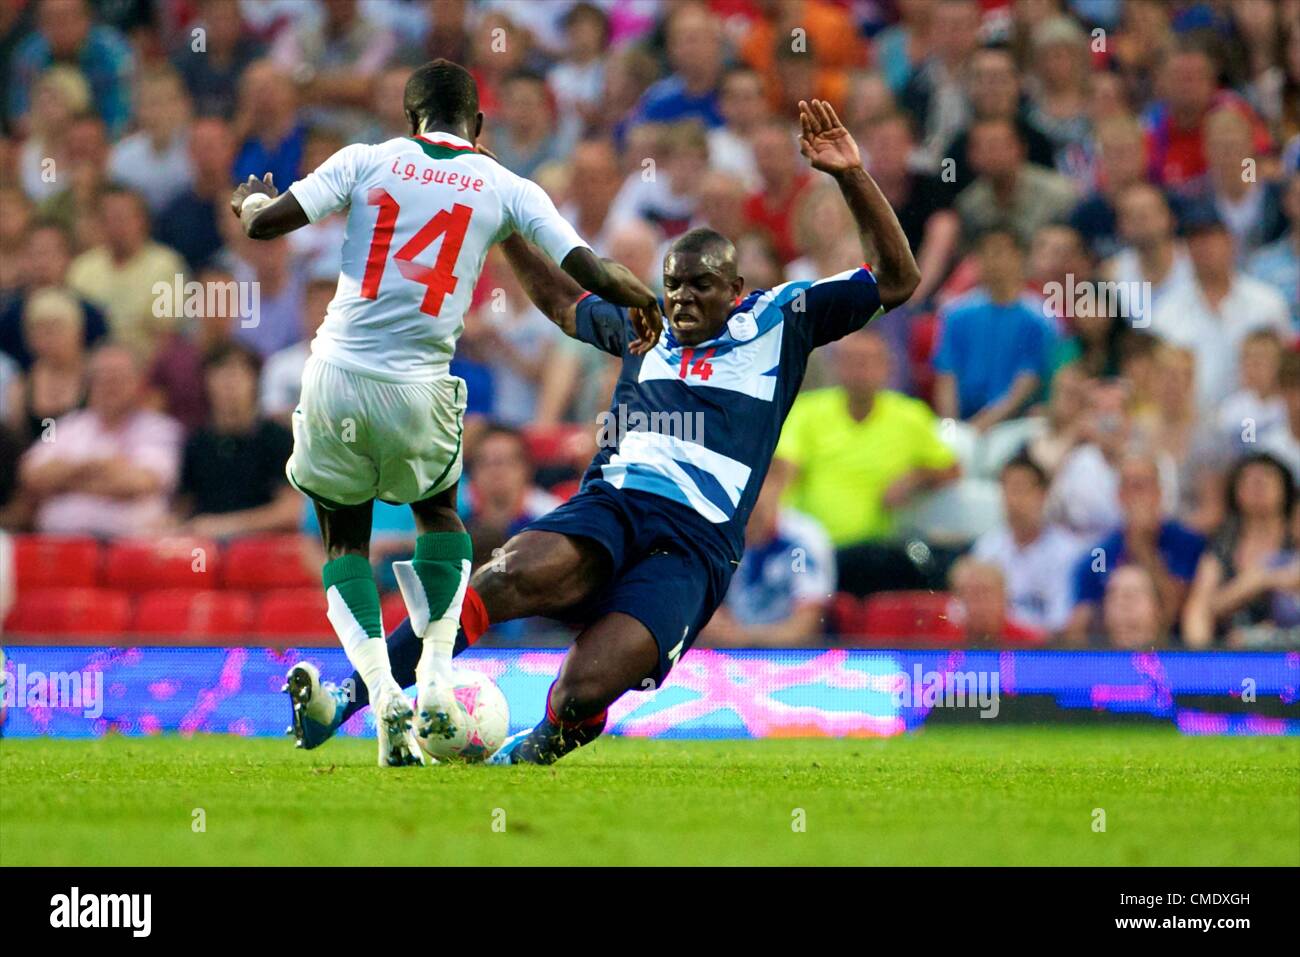 26.07.2012 Manchester, England. Senegal midfielder Idrissa Gueye and Team GB defender Micah Richards in action during the first round group A mens match between Team GB and Senegal. Stock Photo